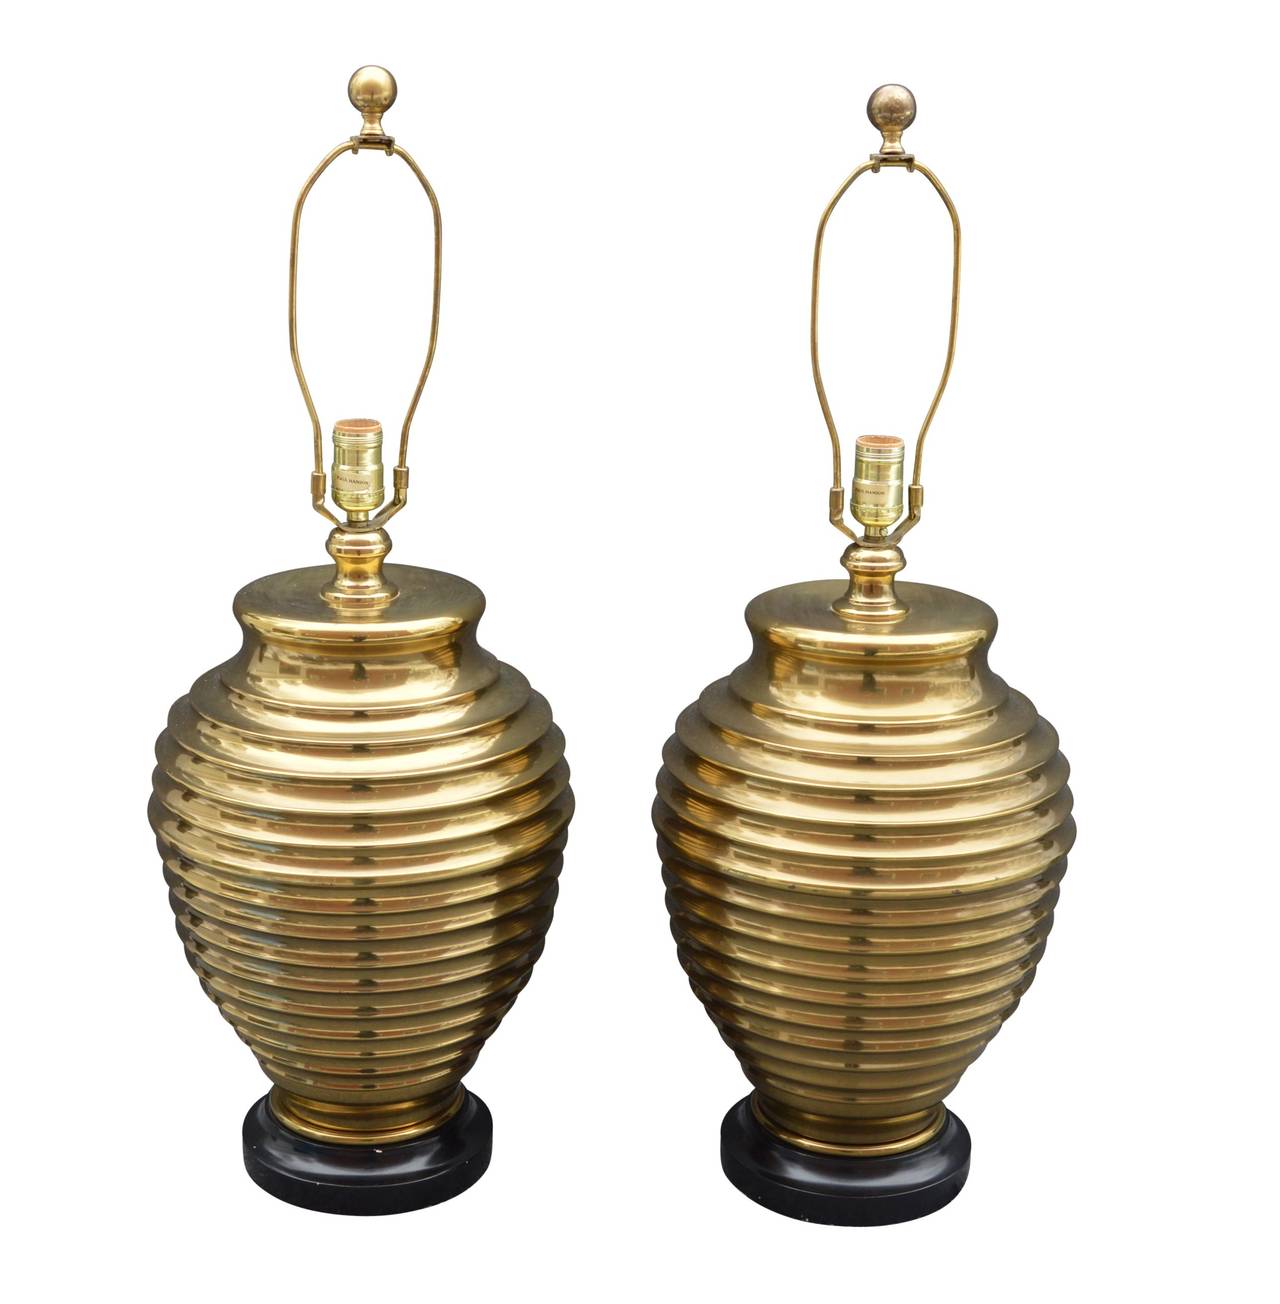 Vintage pair of brass table lamps in sharp and elegant beehive shape on a wooden foot. Very sturdy and relatively heavy, however they can be weighted further if need be.